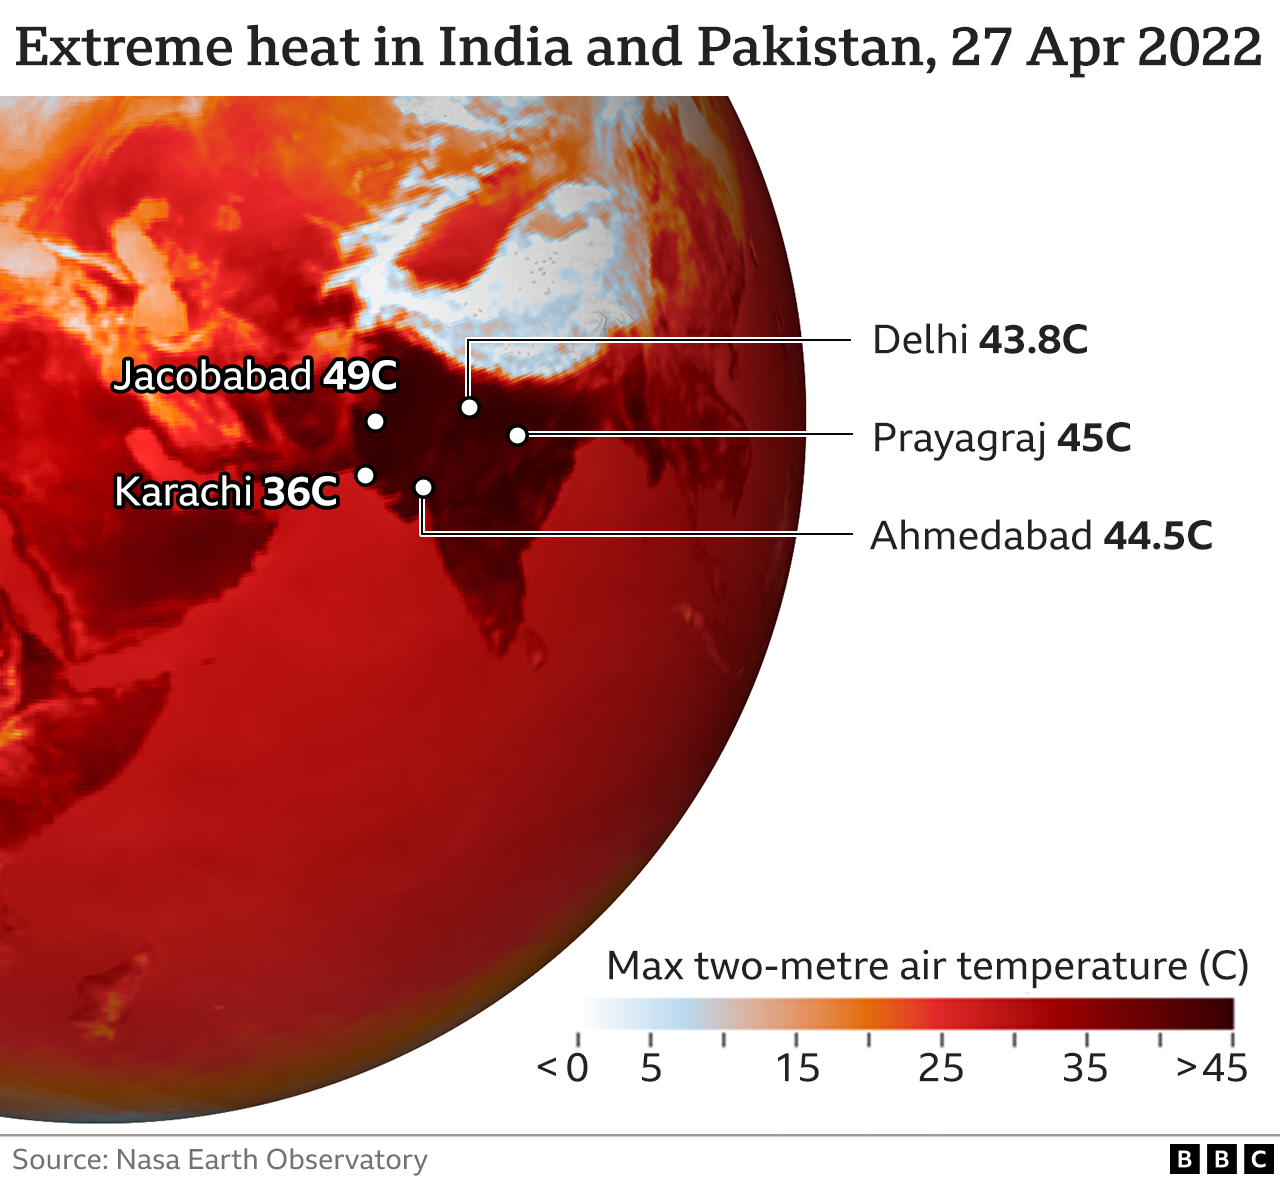 map showing extreme temperatures in India and Pakistan